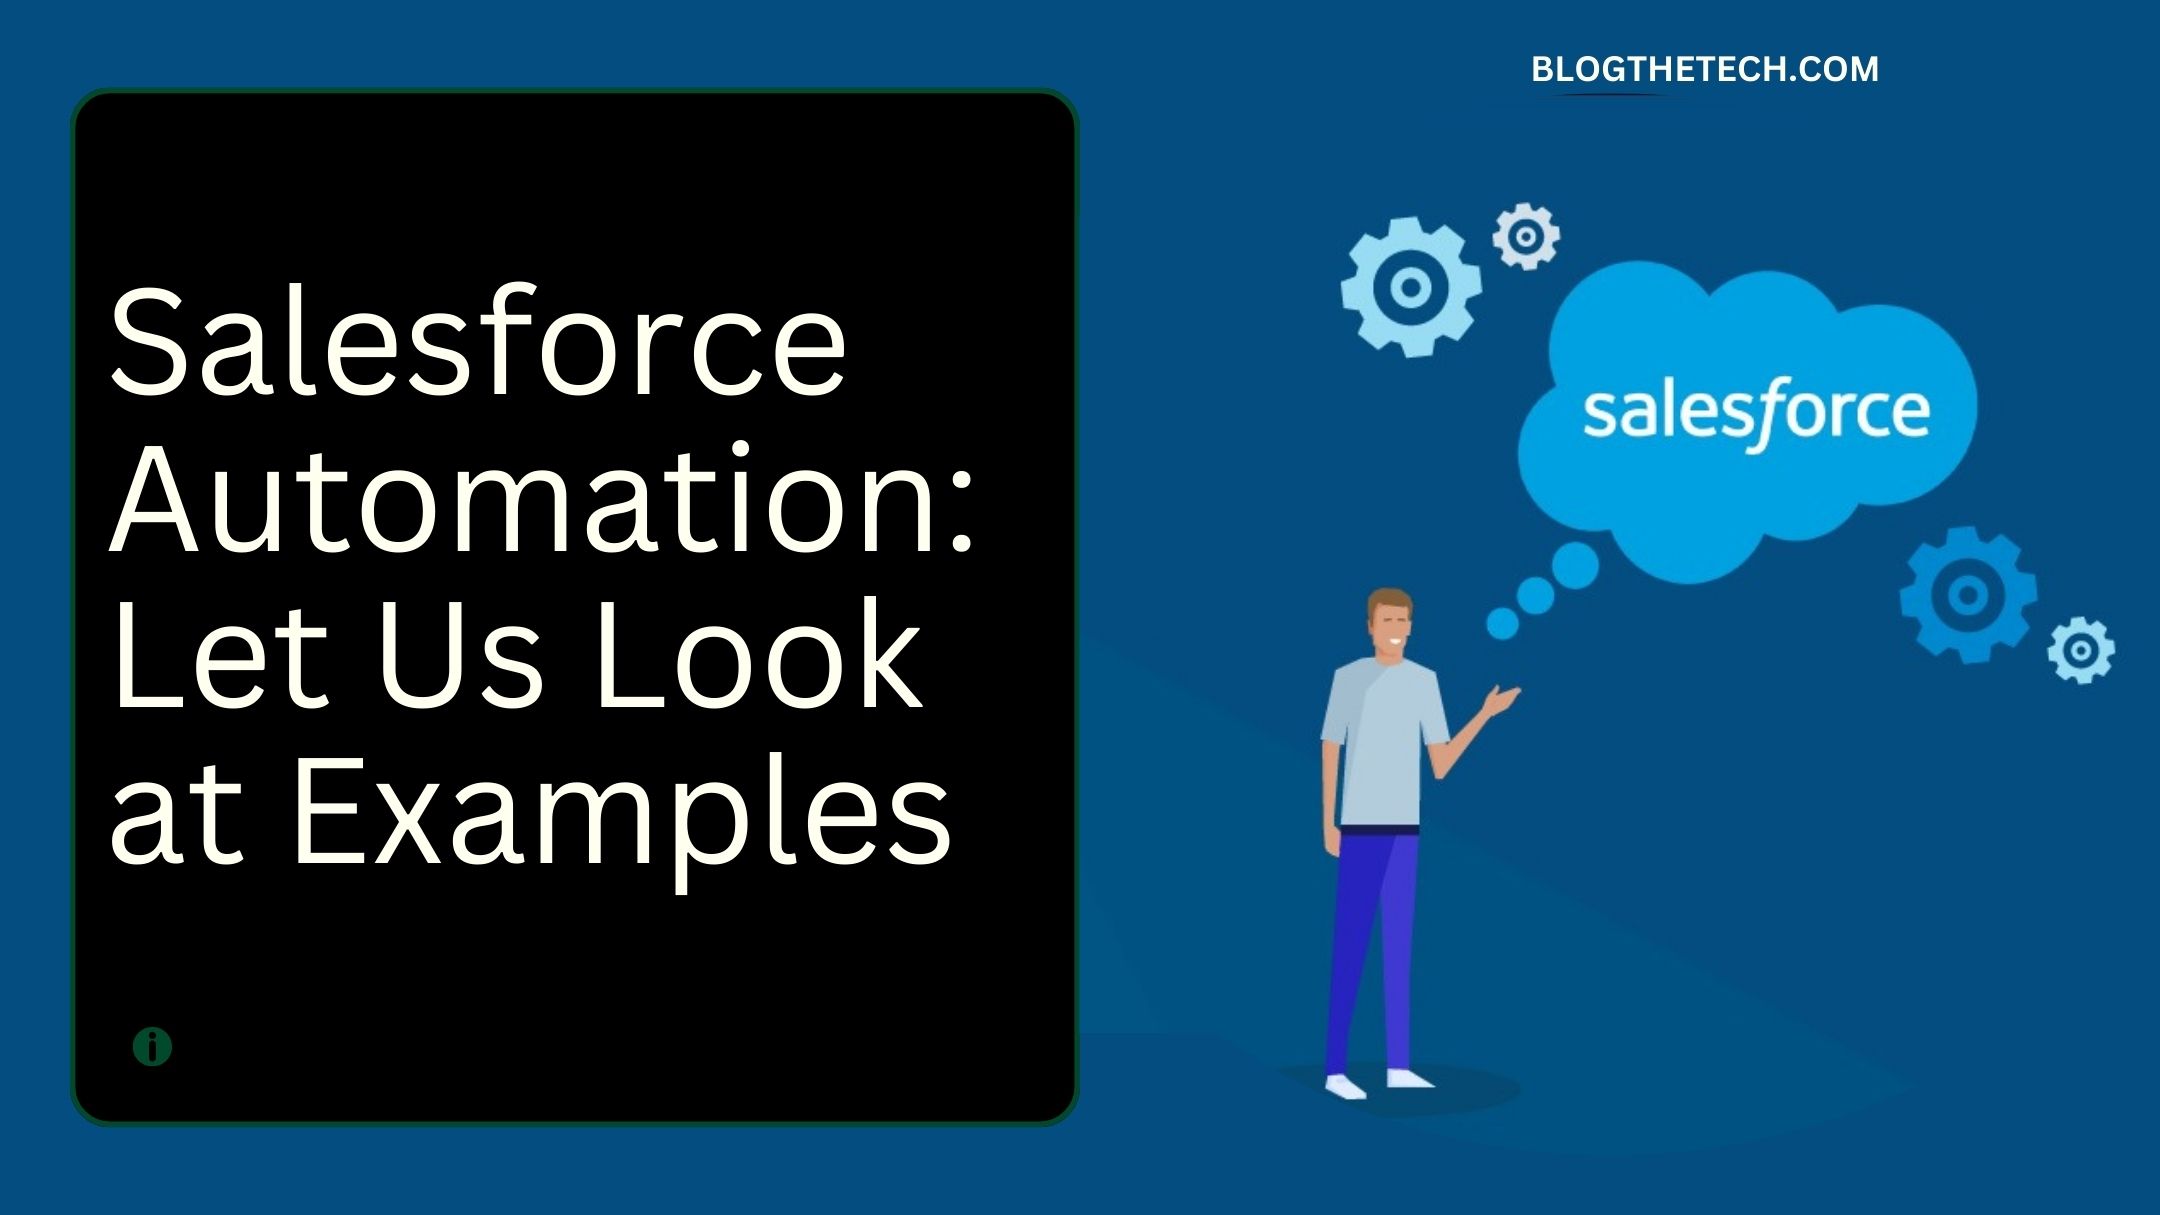 salesforce-automation-look-at-examples-featured